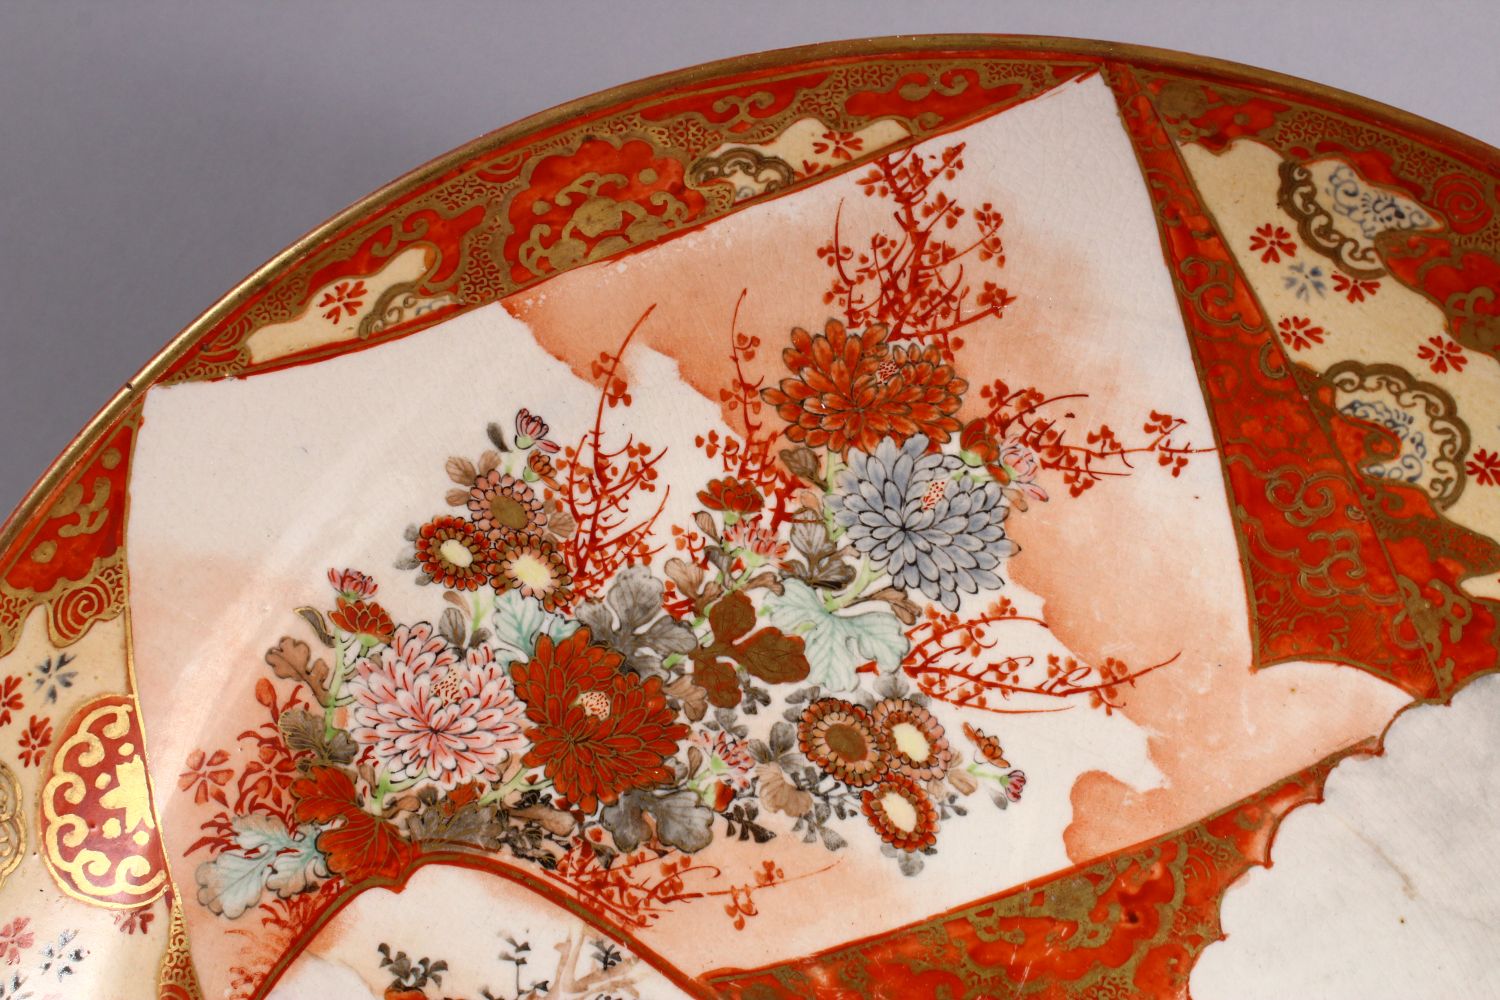 A JAPANESE MEIJI PERIOD KUTANI PORCELAIN CHARGER, with decoration of figures exterior, birds amongst - Image 3 of 6